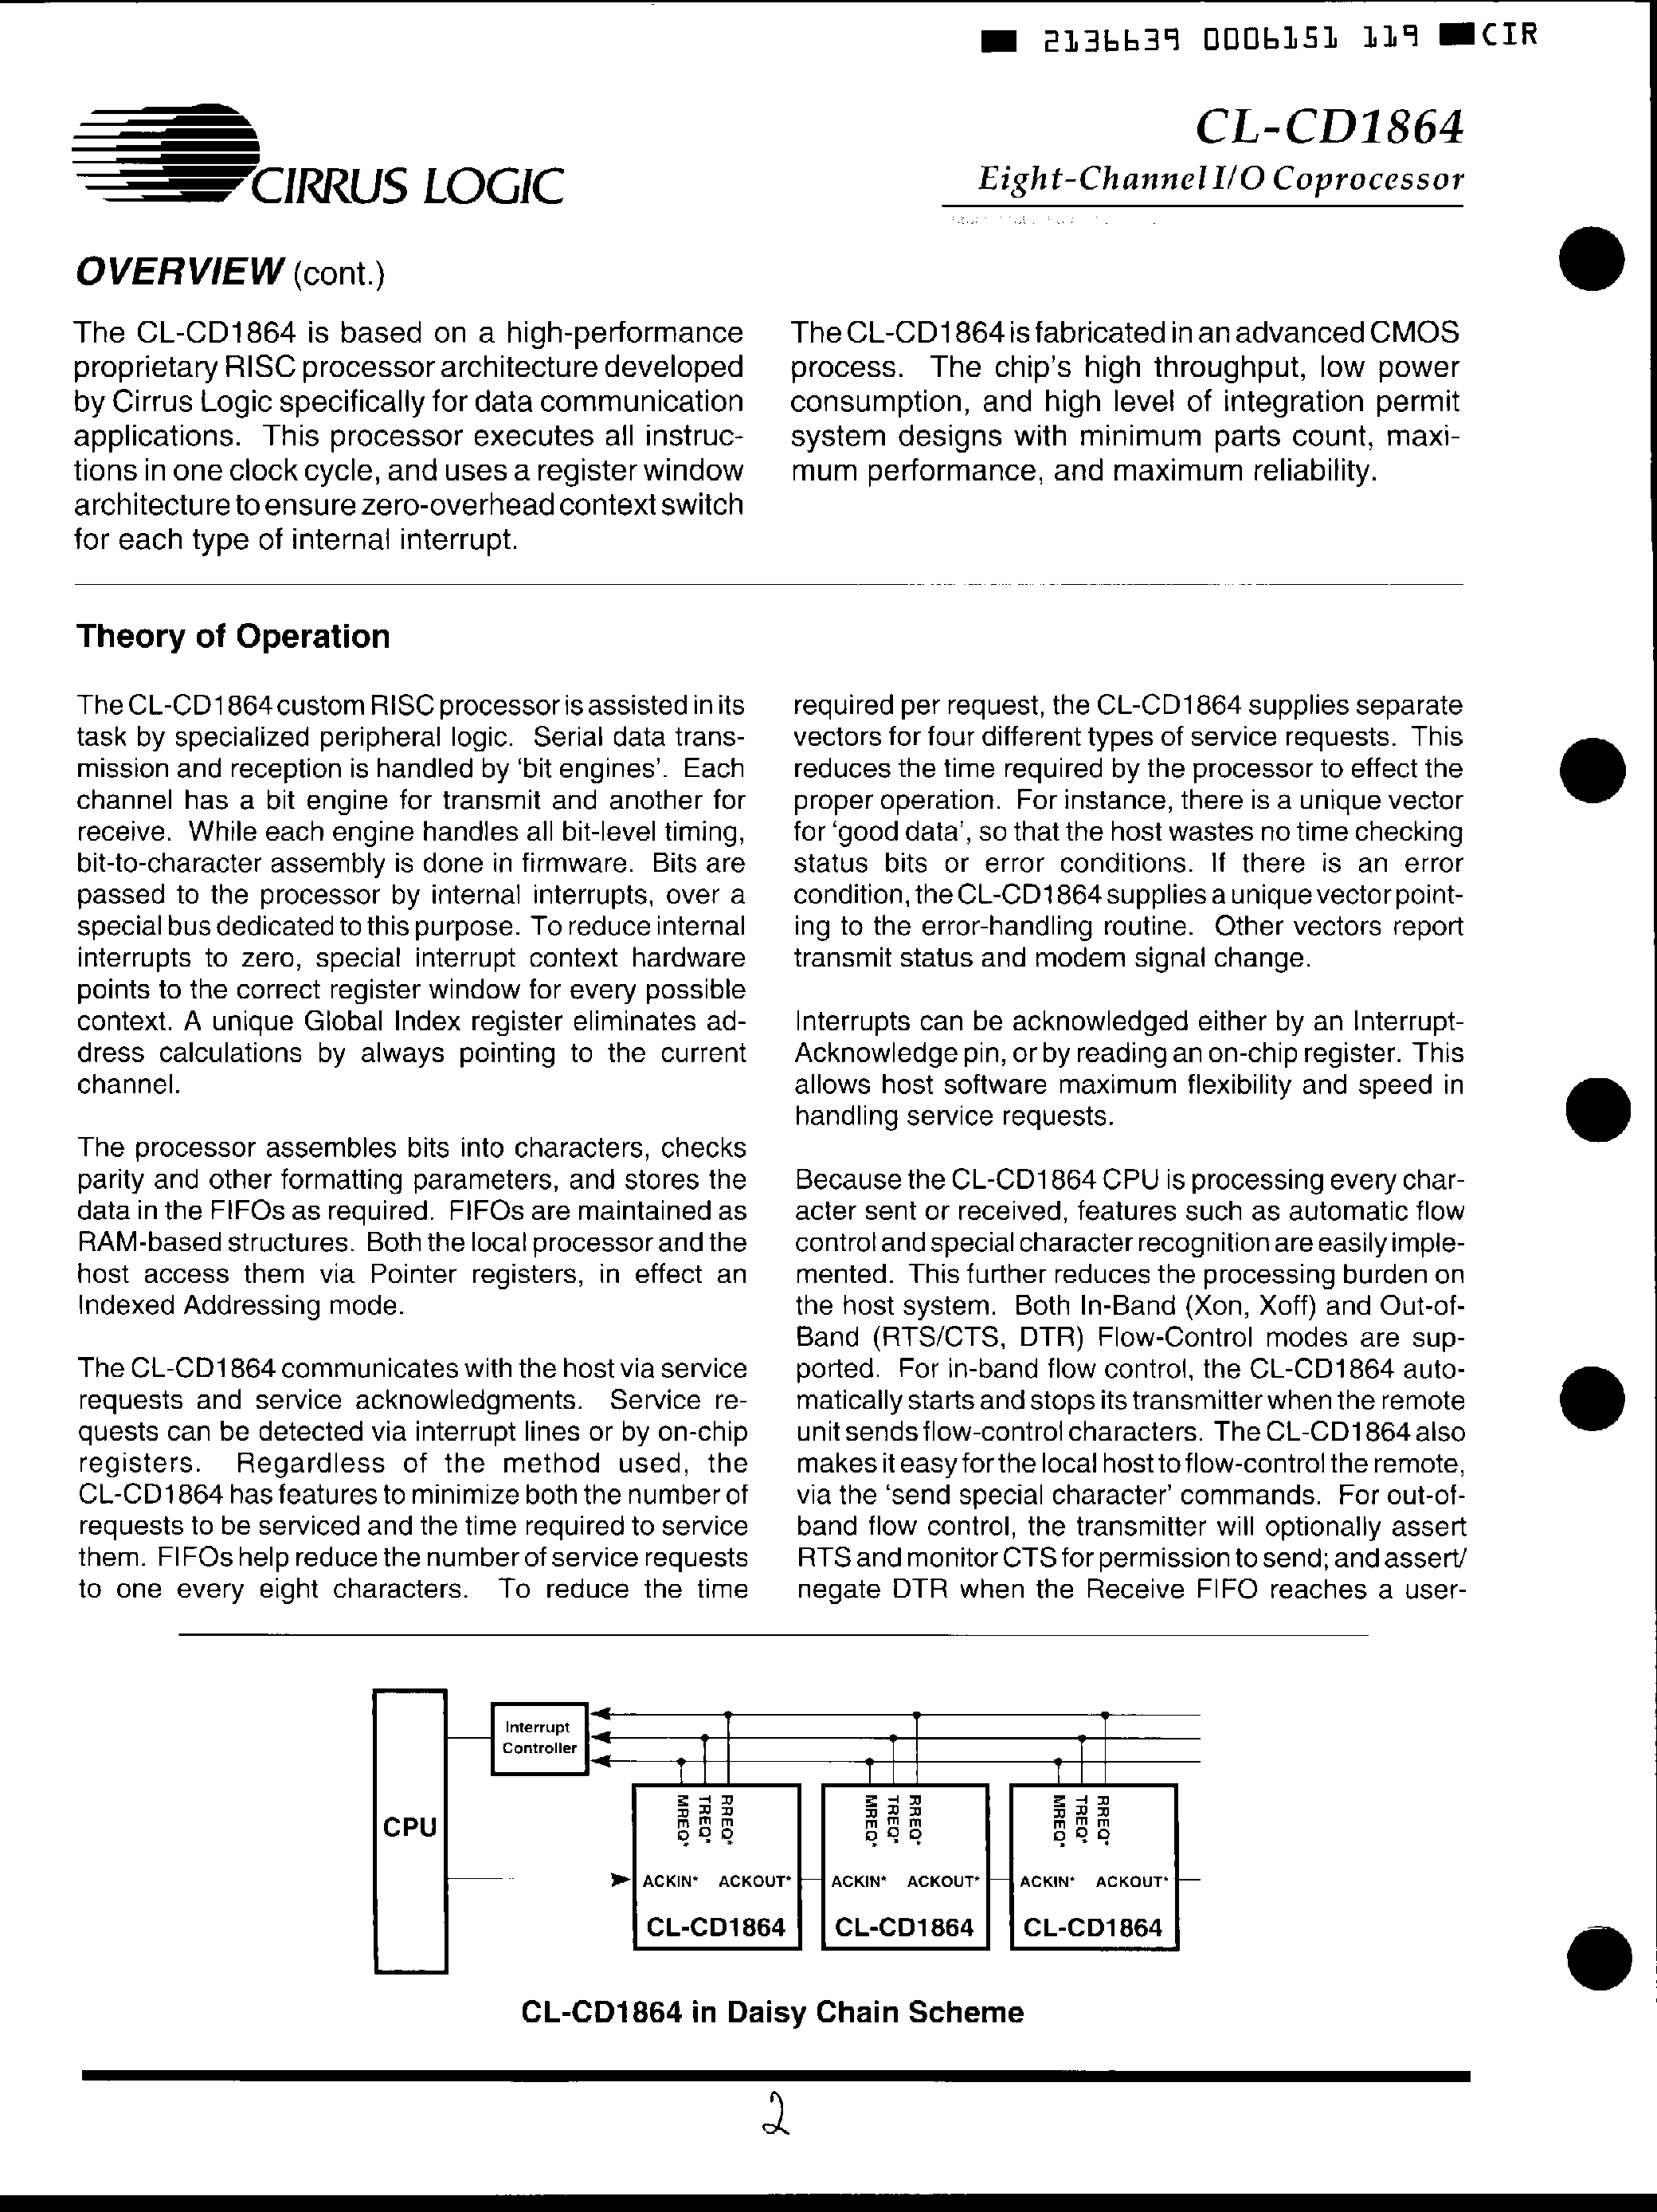 Datasheet CL-CD1864 - Intelligent 8-Channel Communications Controller page 2